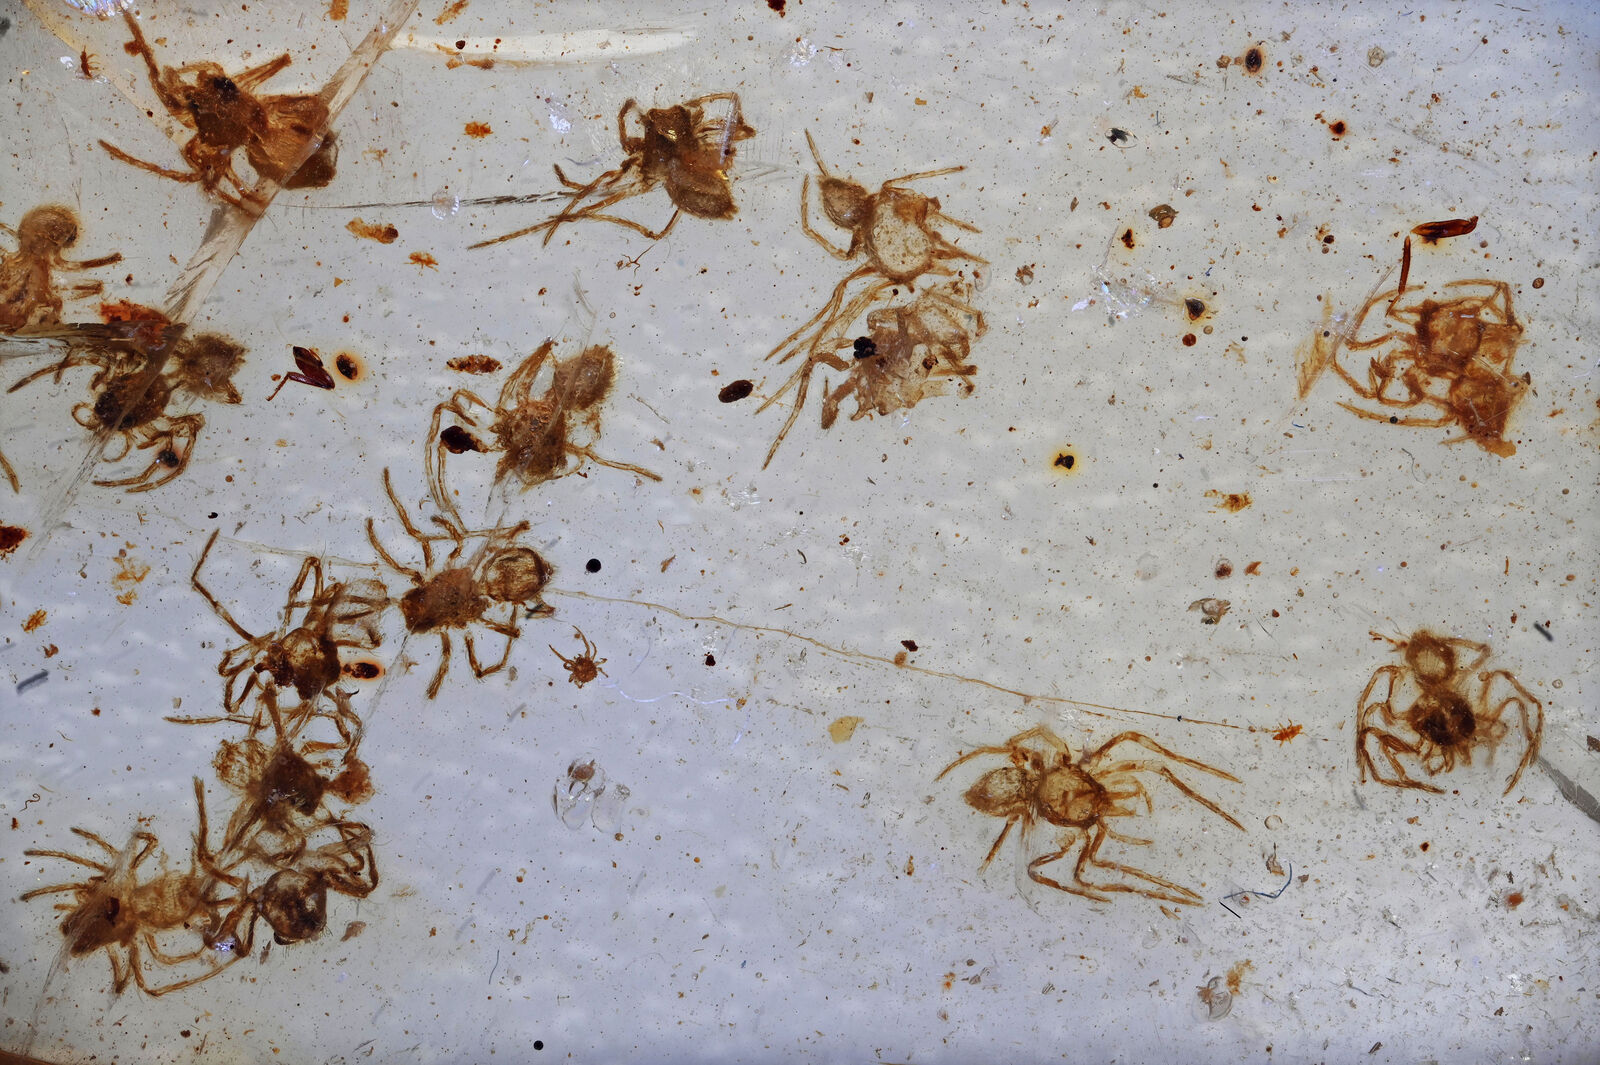 Large swarm of Spiderlings, Fossil inclusion in Burmese Amber